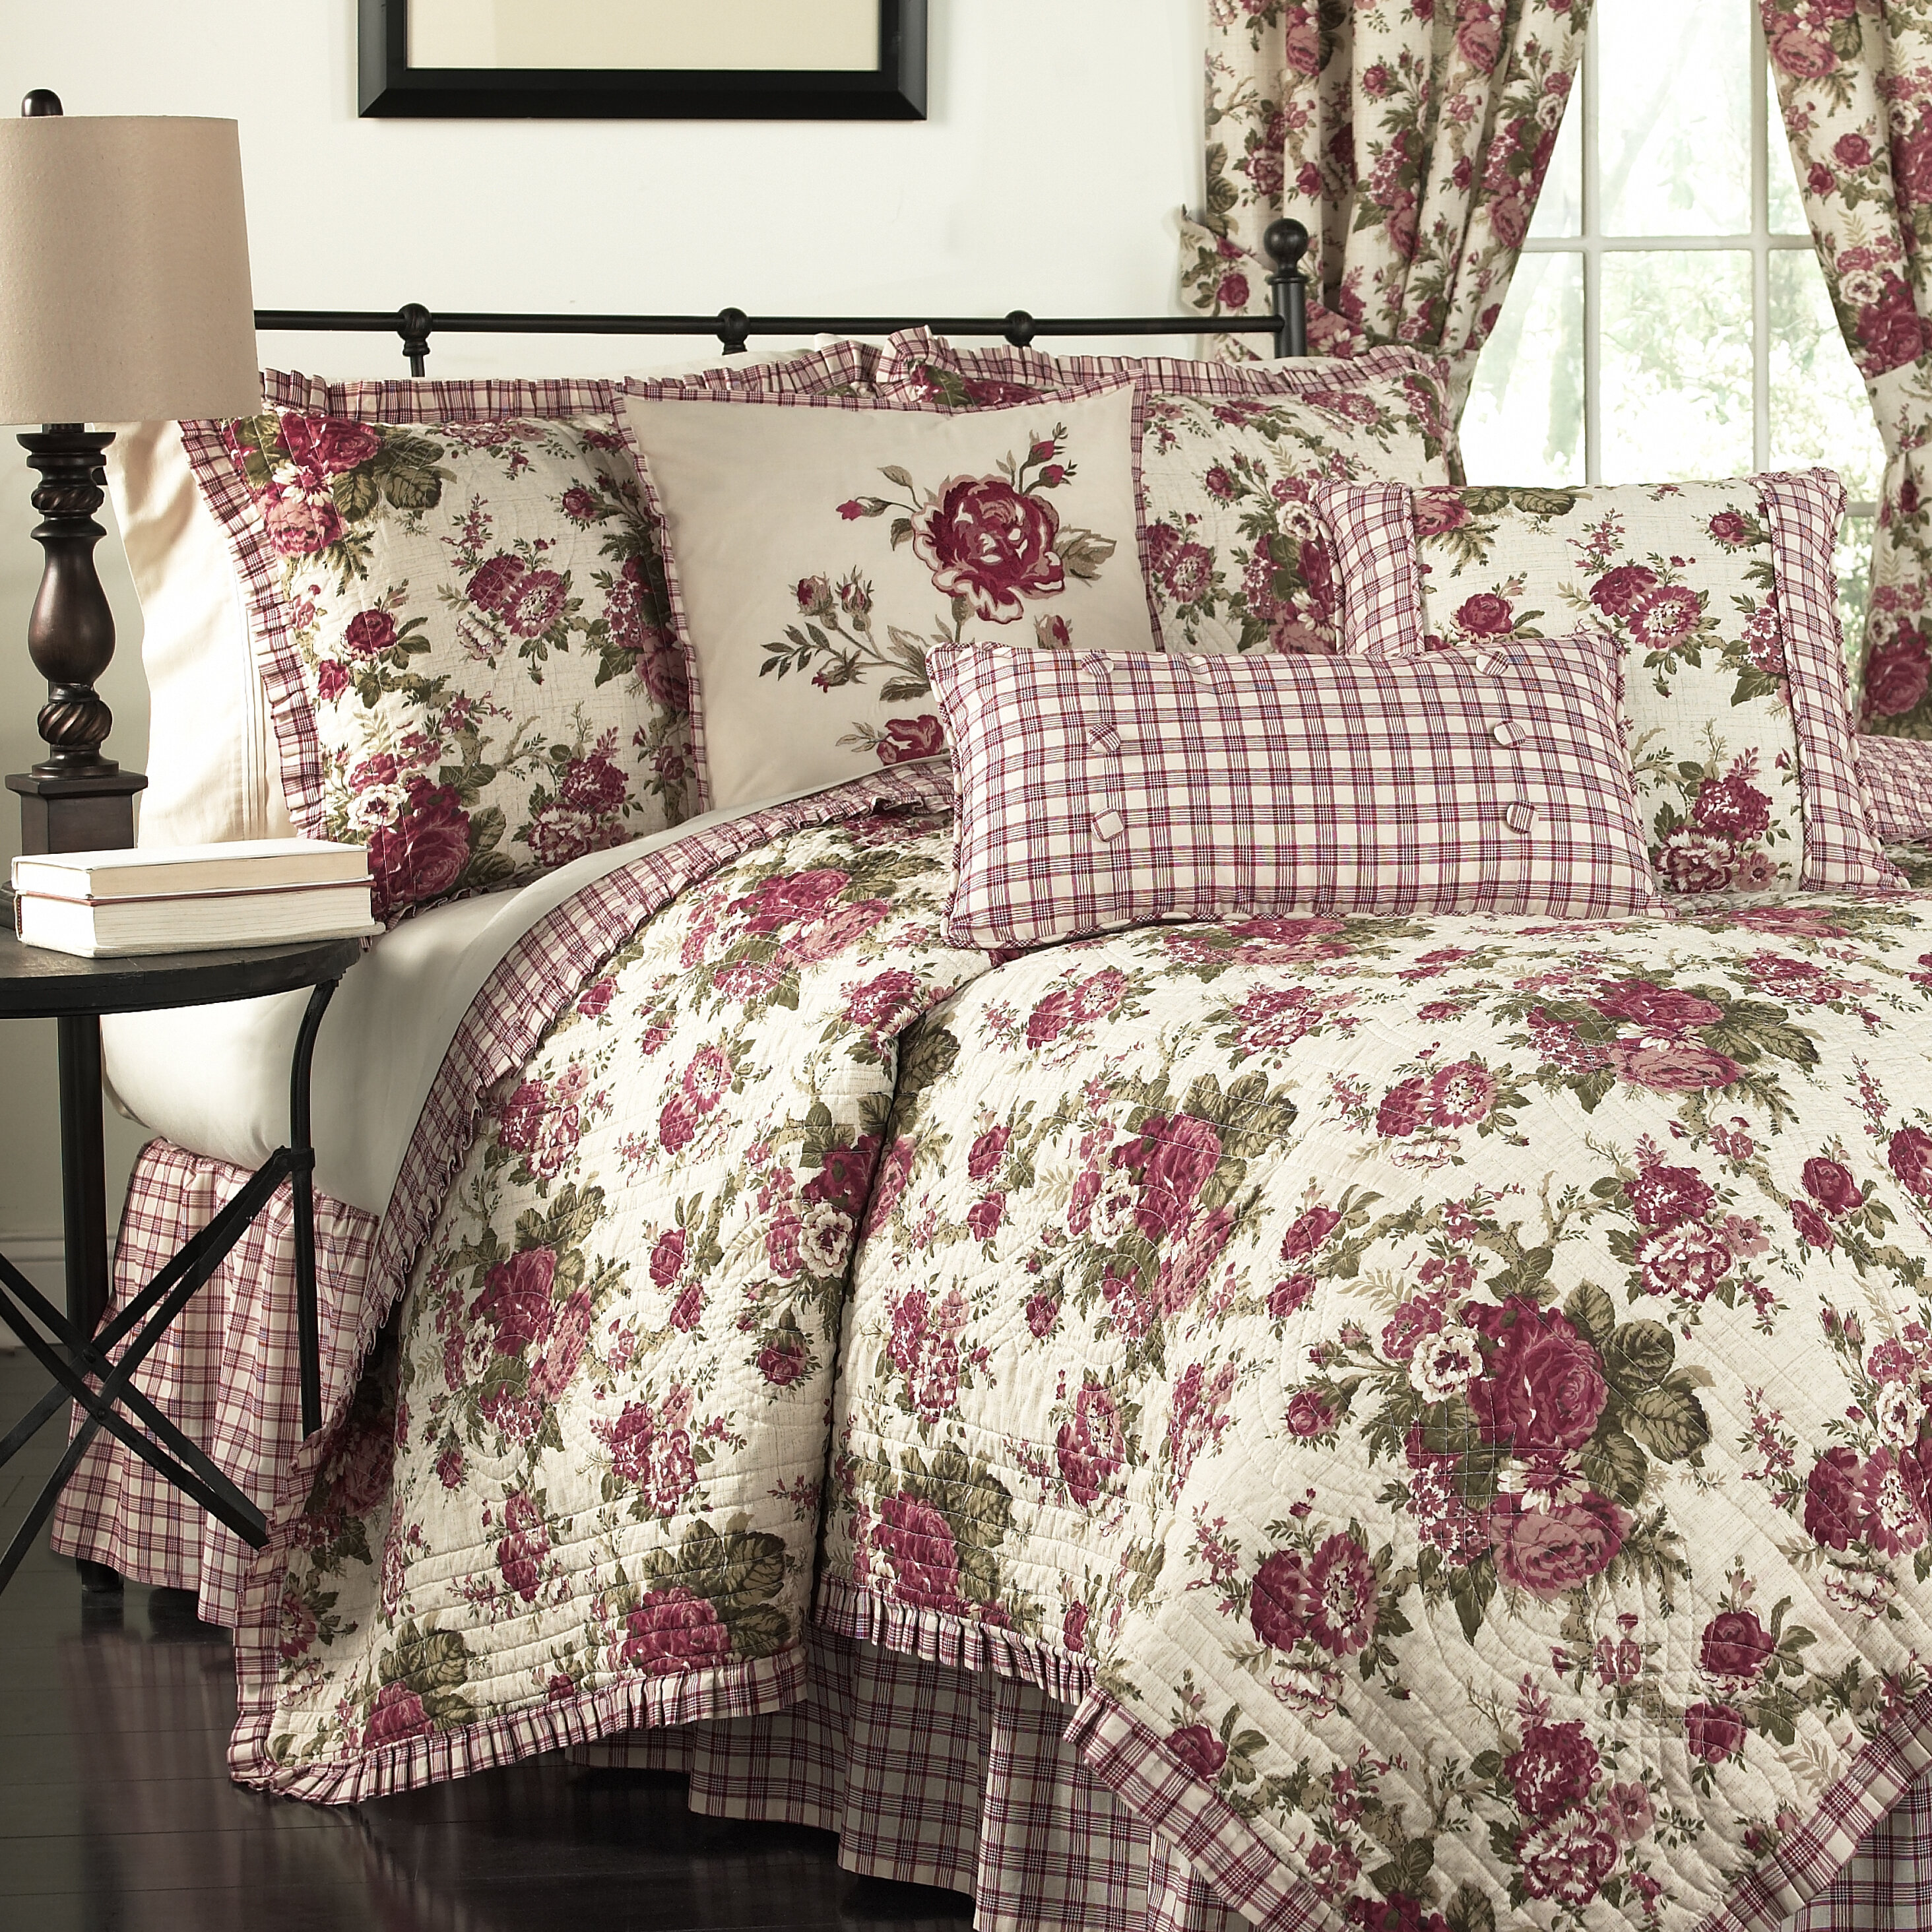 Details about   WAVERLY Norfolk Reversible Quilt Collection King Tea Stain 